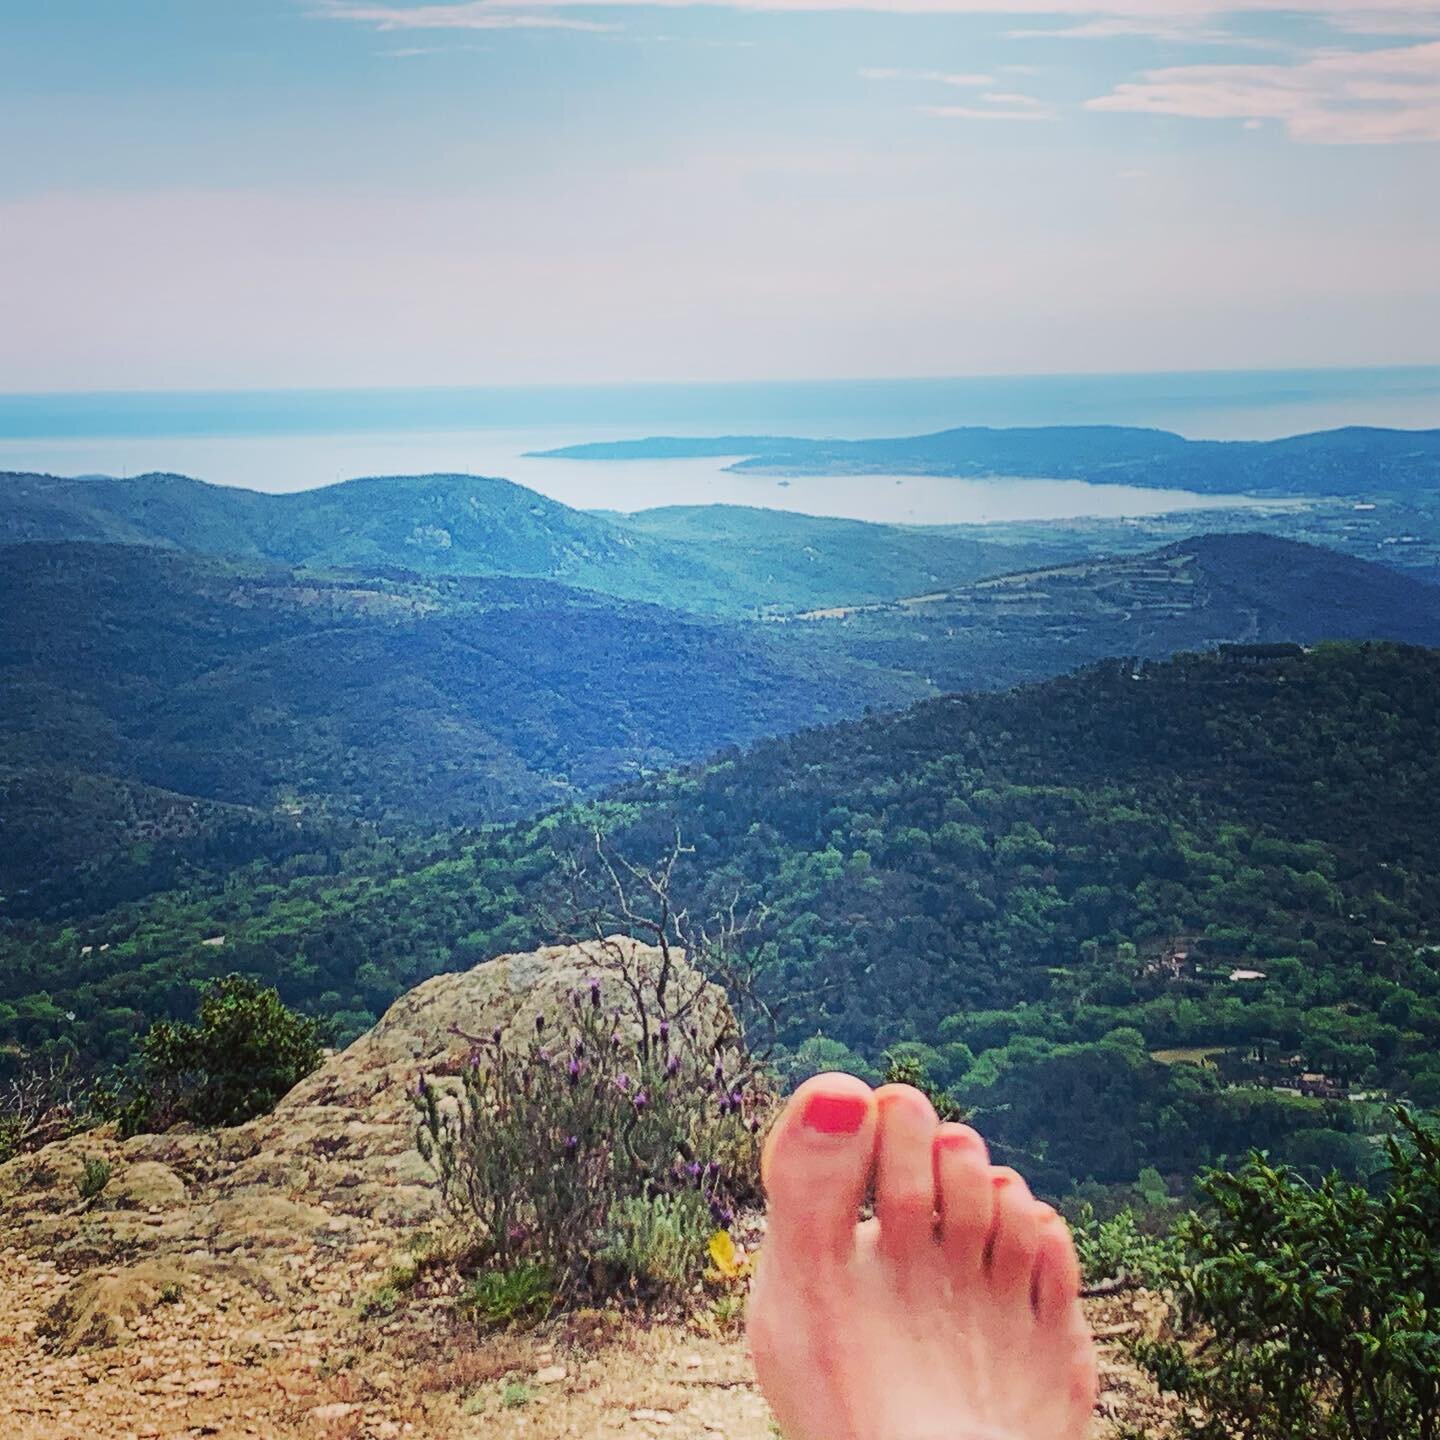 Hike interrupted! Had to sit down, kick off my boots, and gather some electrons and early UVA. 

And this view of the Gulf of St Tropez never gets old. 💛☀️

#quantumbiology, #sunlight, #structuredwater, #freshair, #birdsong, #energy, #gratitude